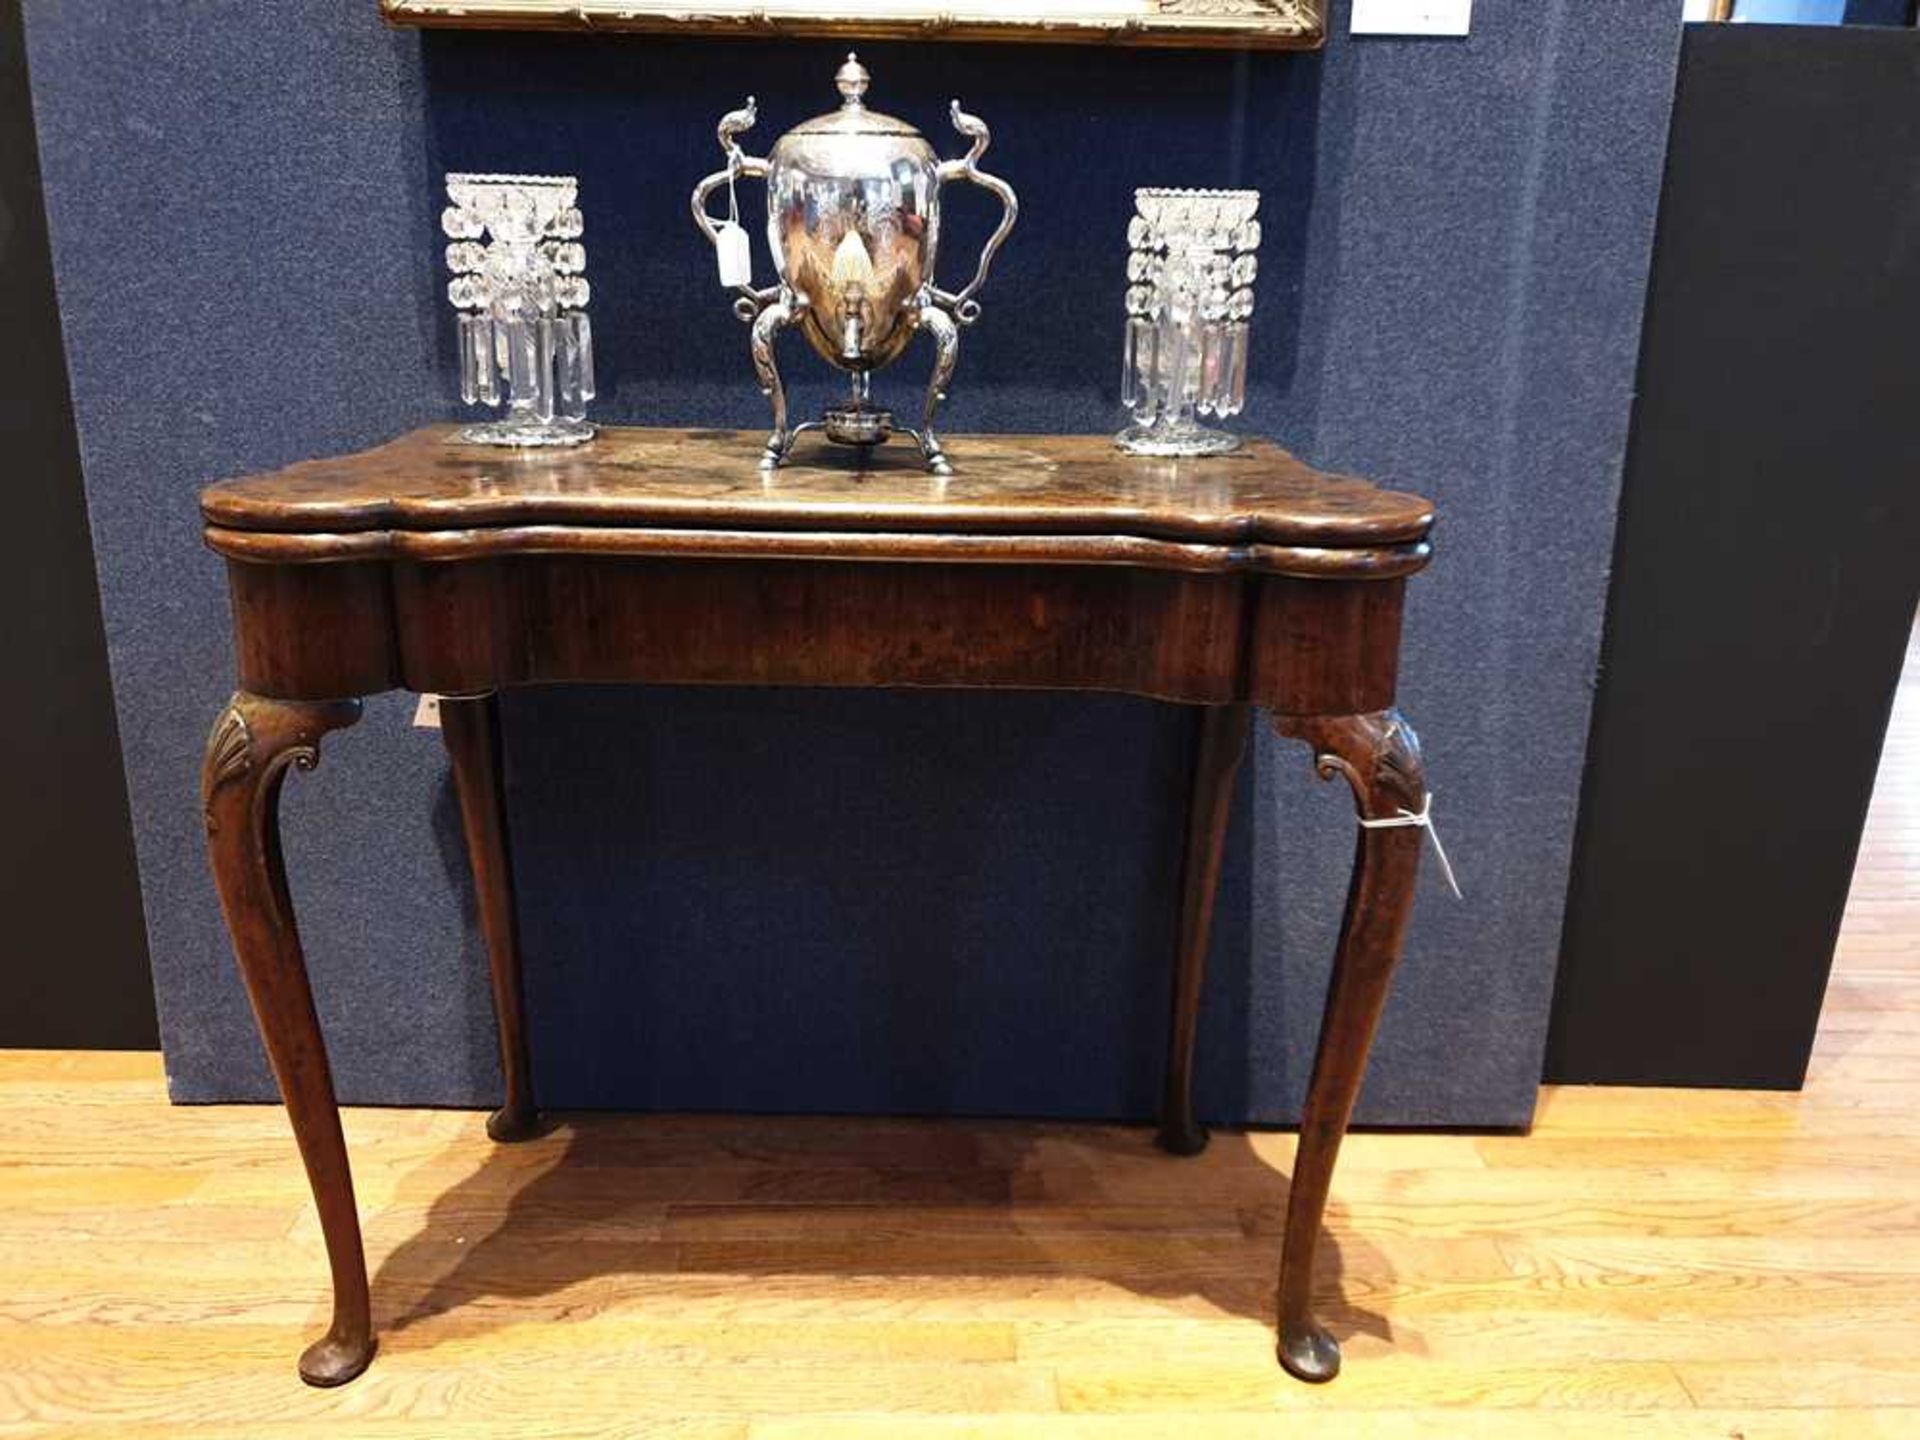 A GEORGE II WALNUT CARD TABLE EARLY 18TH CENTURY - Image 11 of 14